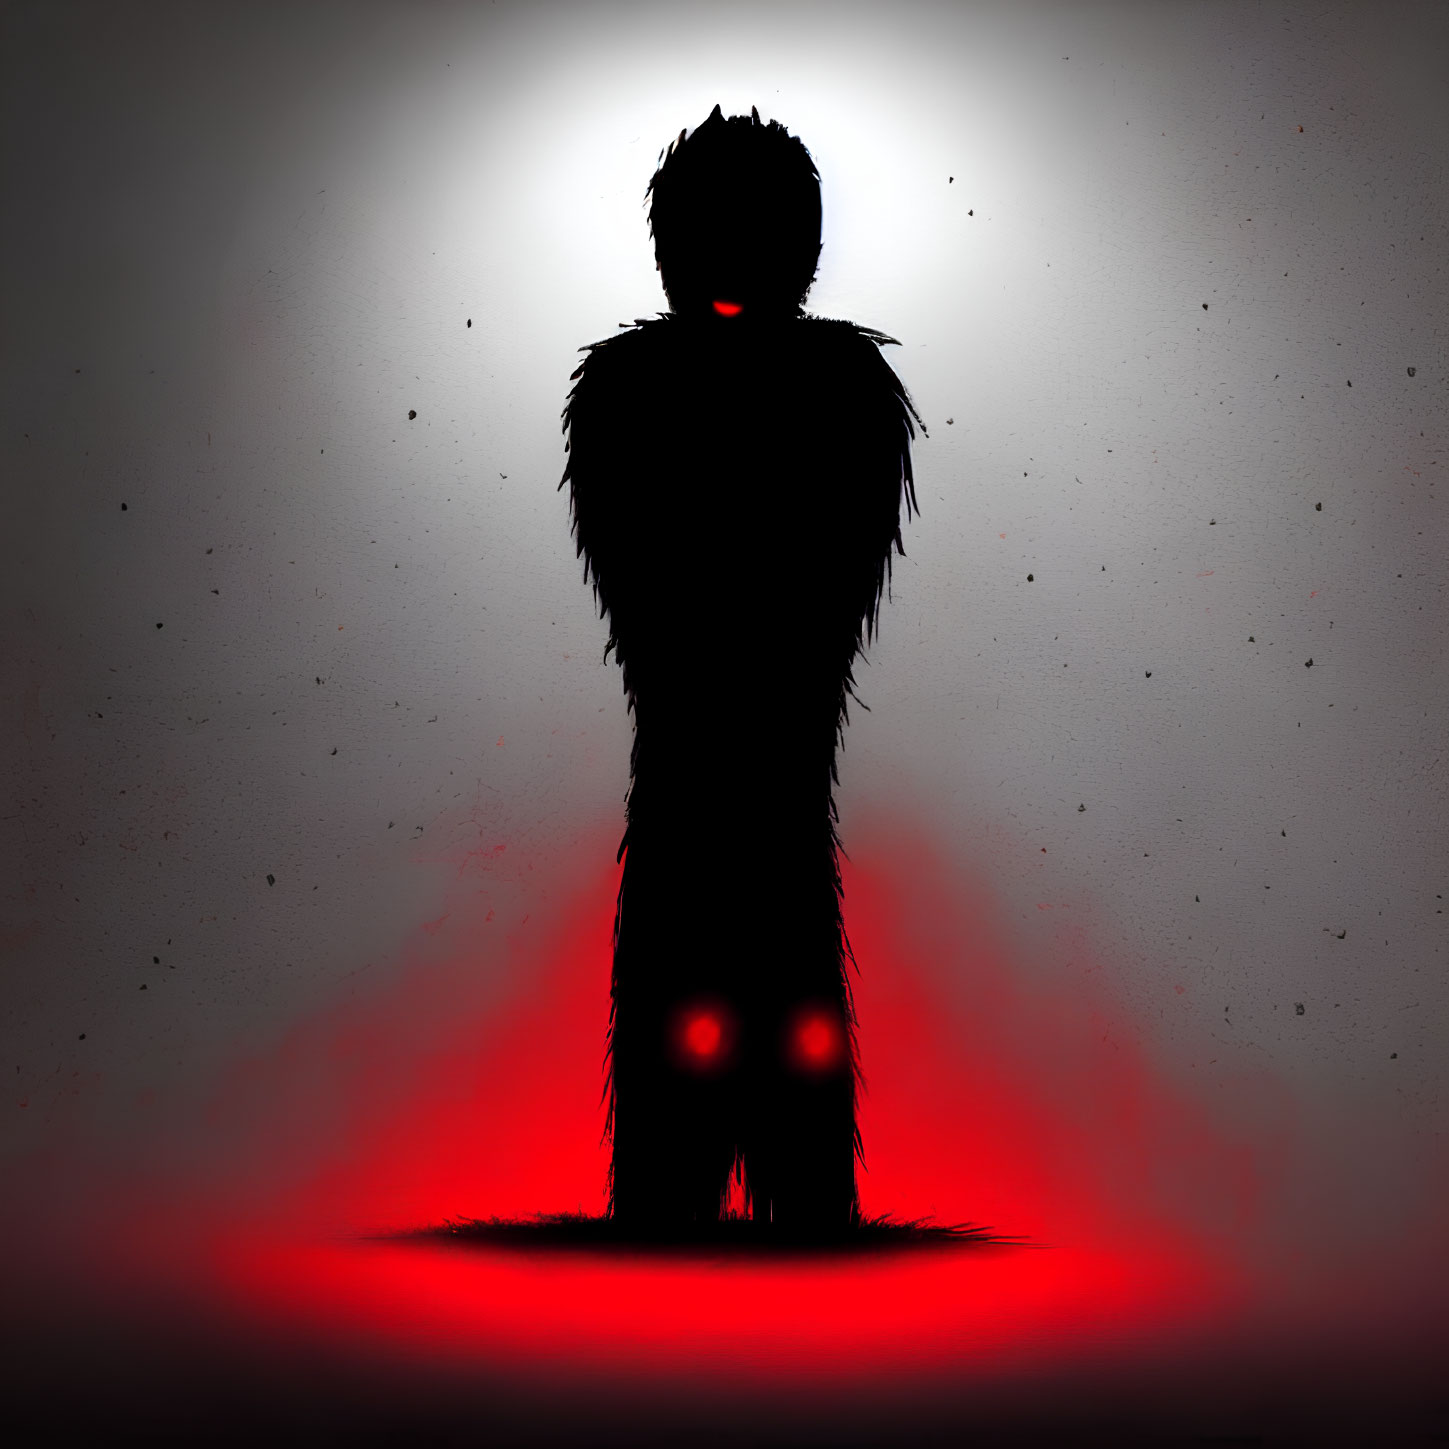 Mysterious figure with glowing red eyes and halo in eerie horror setting